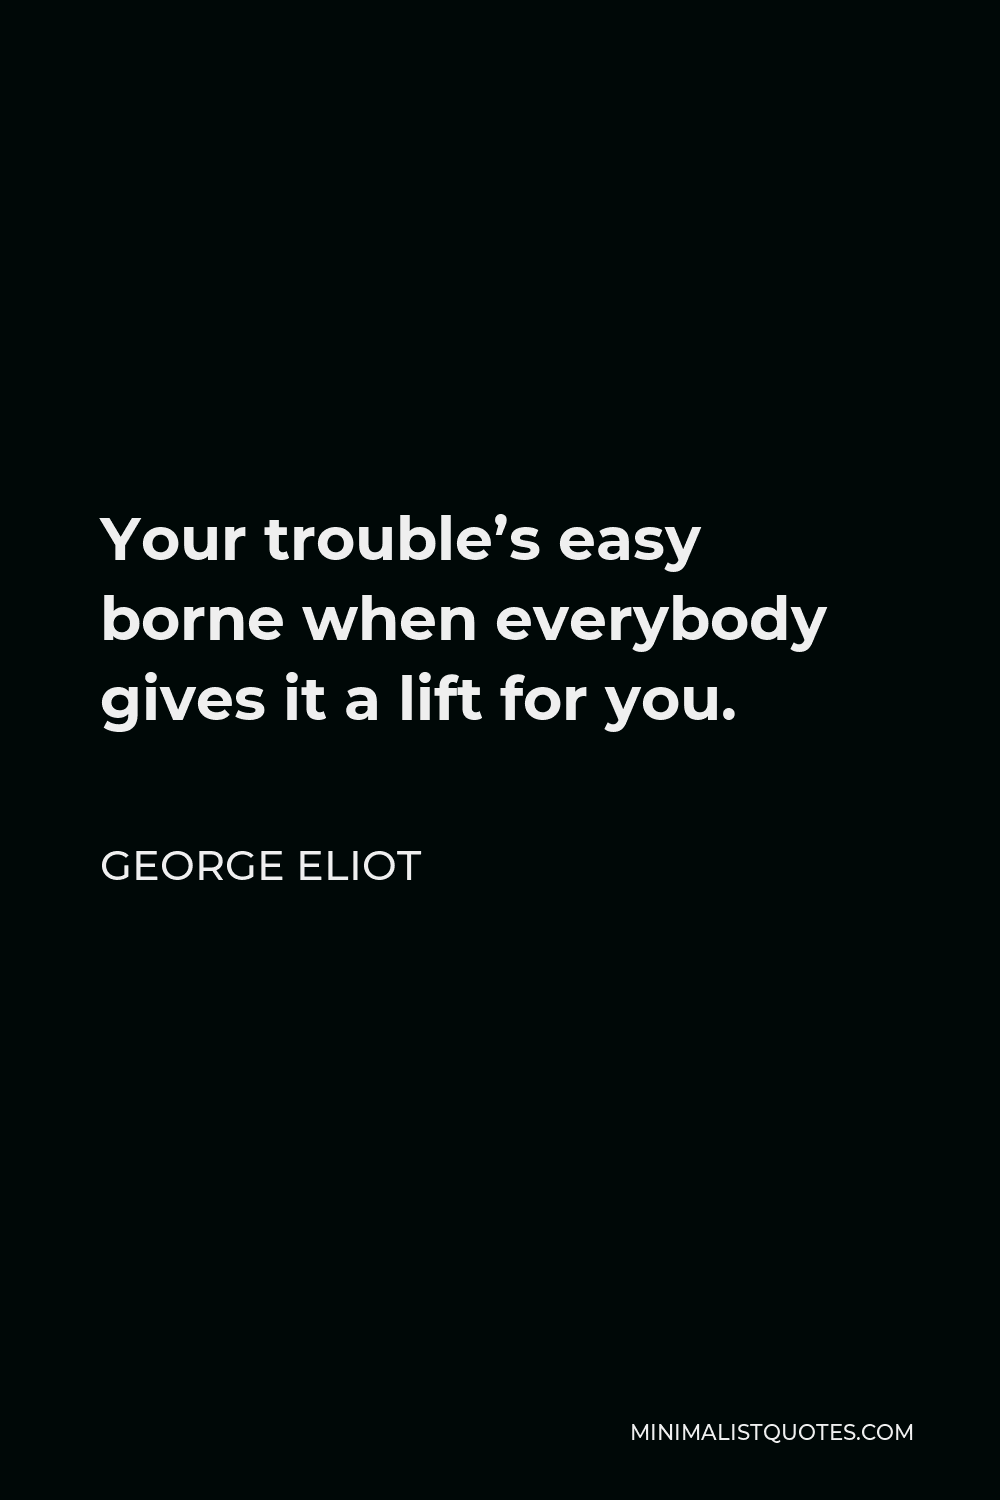 George Eliot Quote - Your trouble’s easy borne when everybody gives it a lift for you.